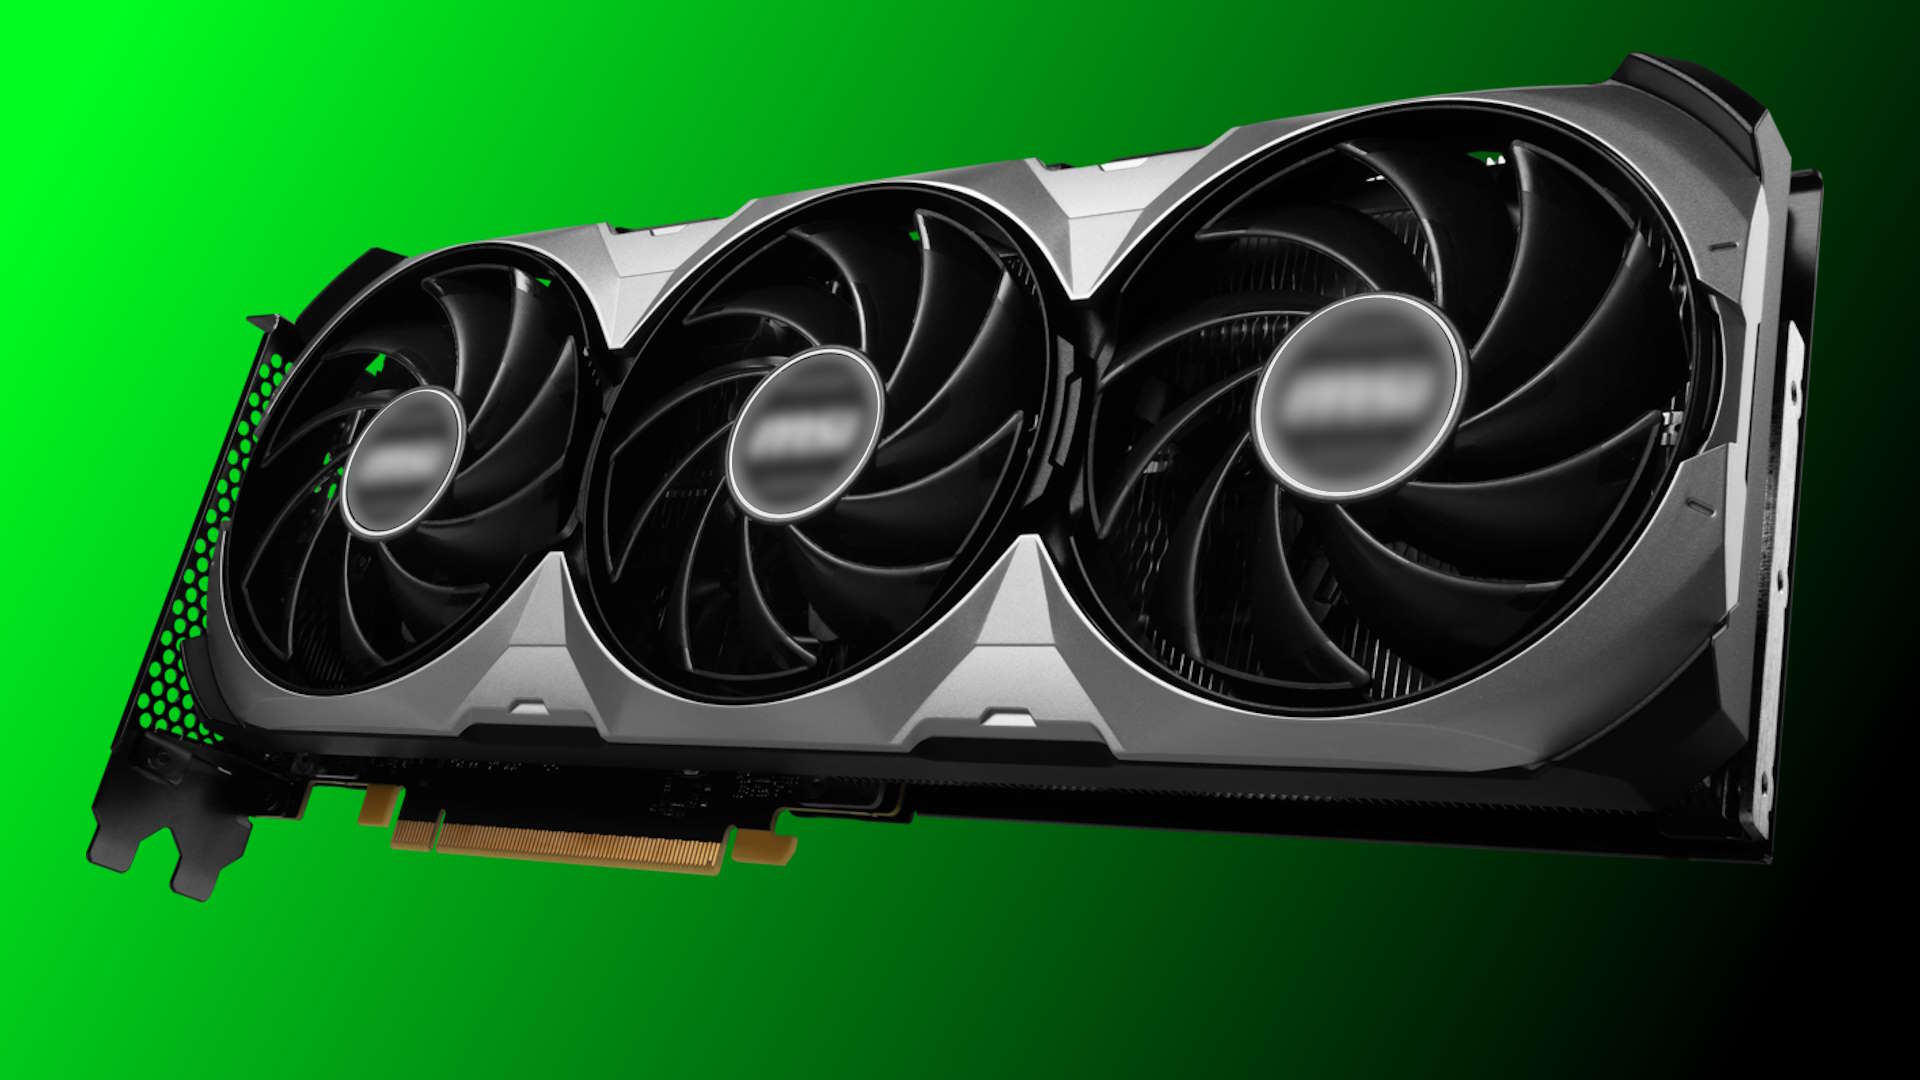 GeForce RTX 4060 Ti 16GB launches with lower than MSRP price in